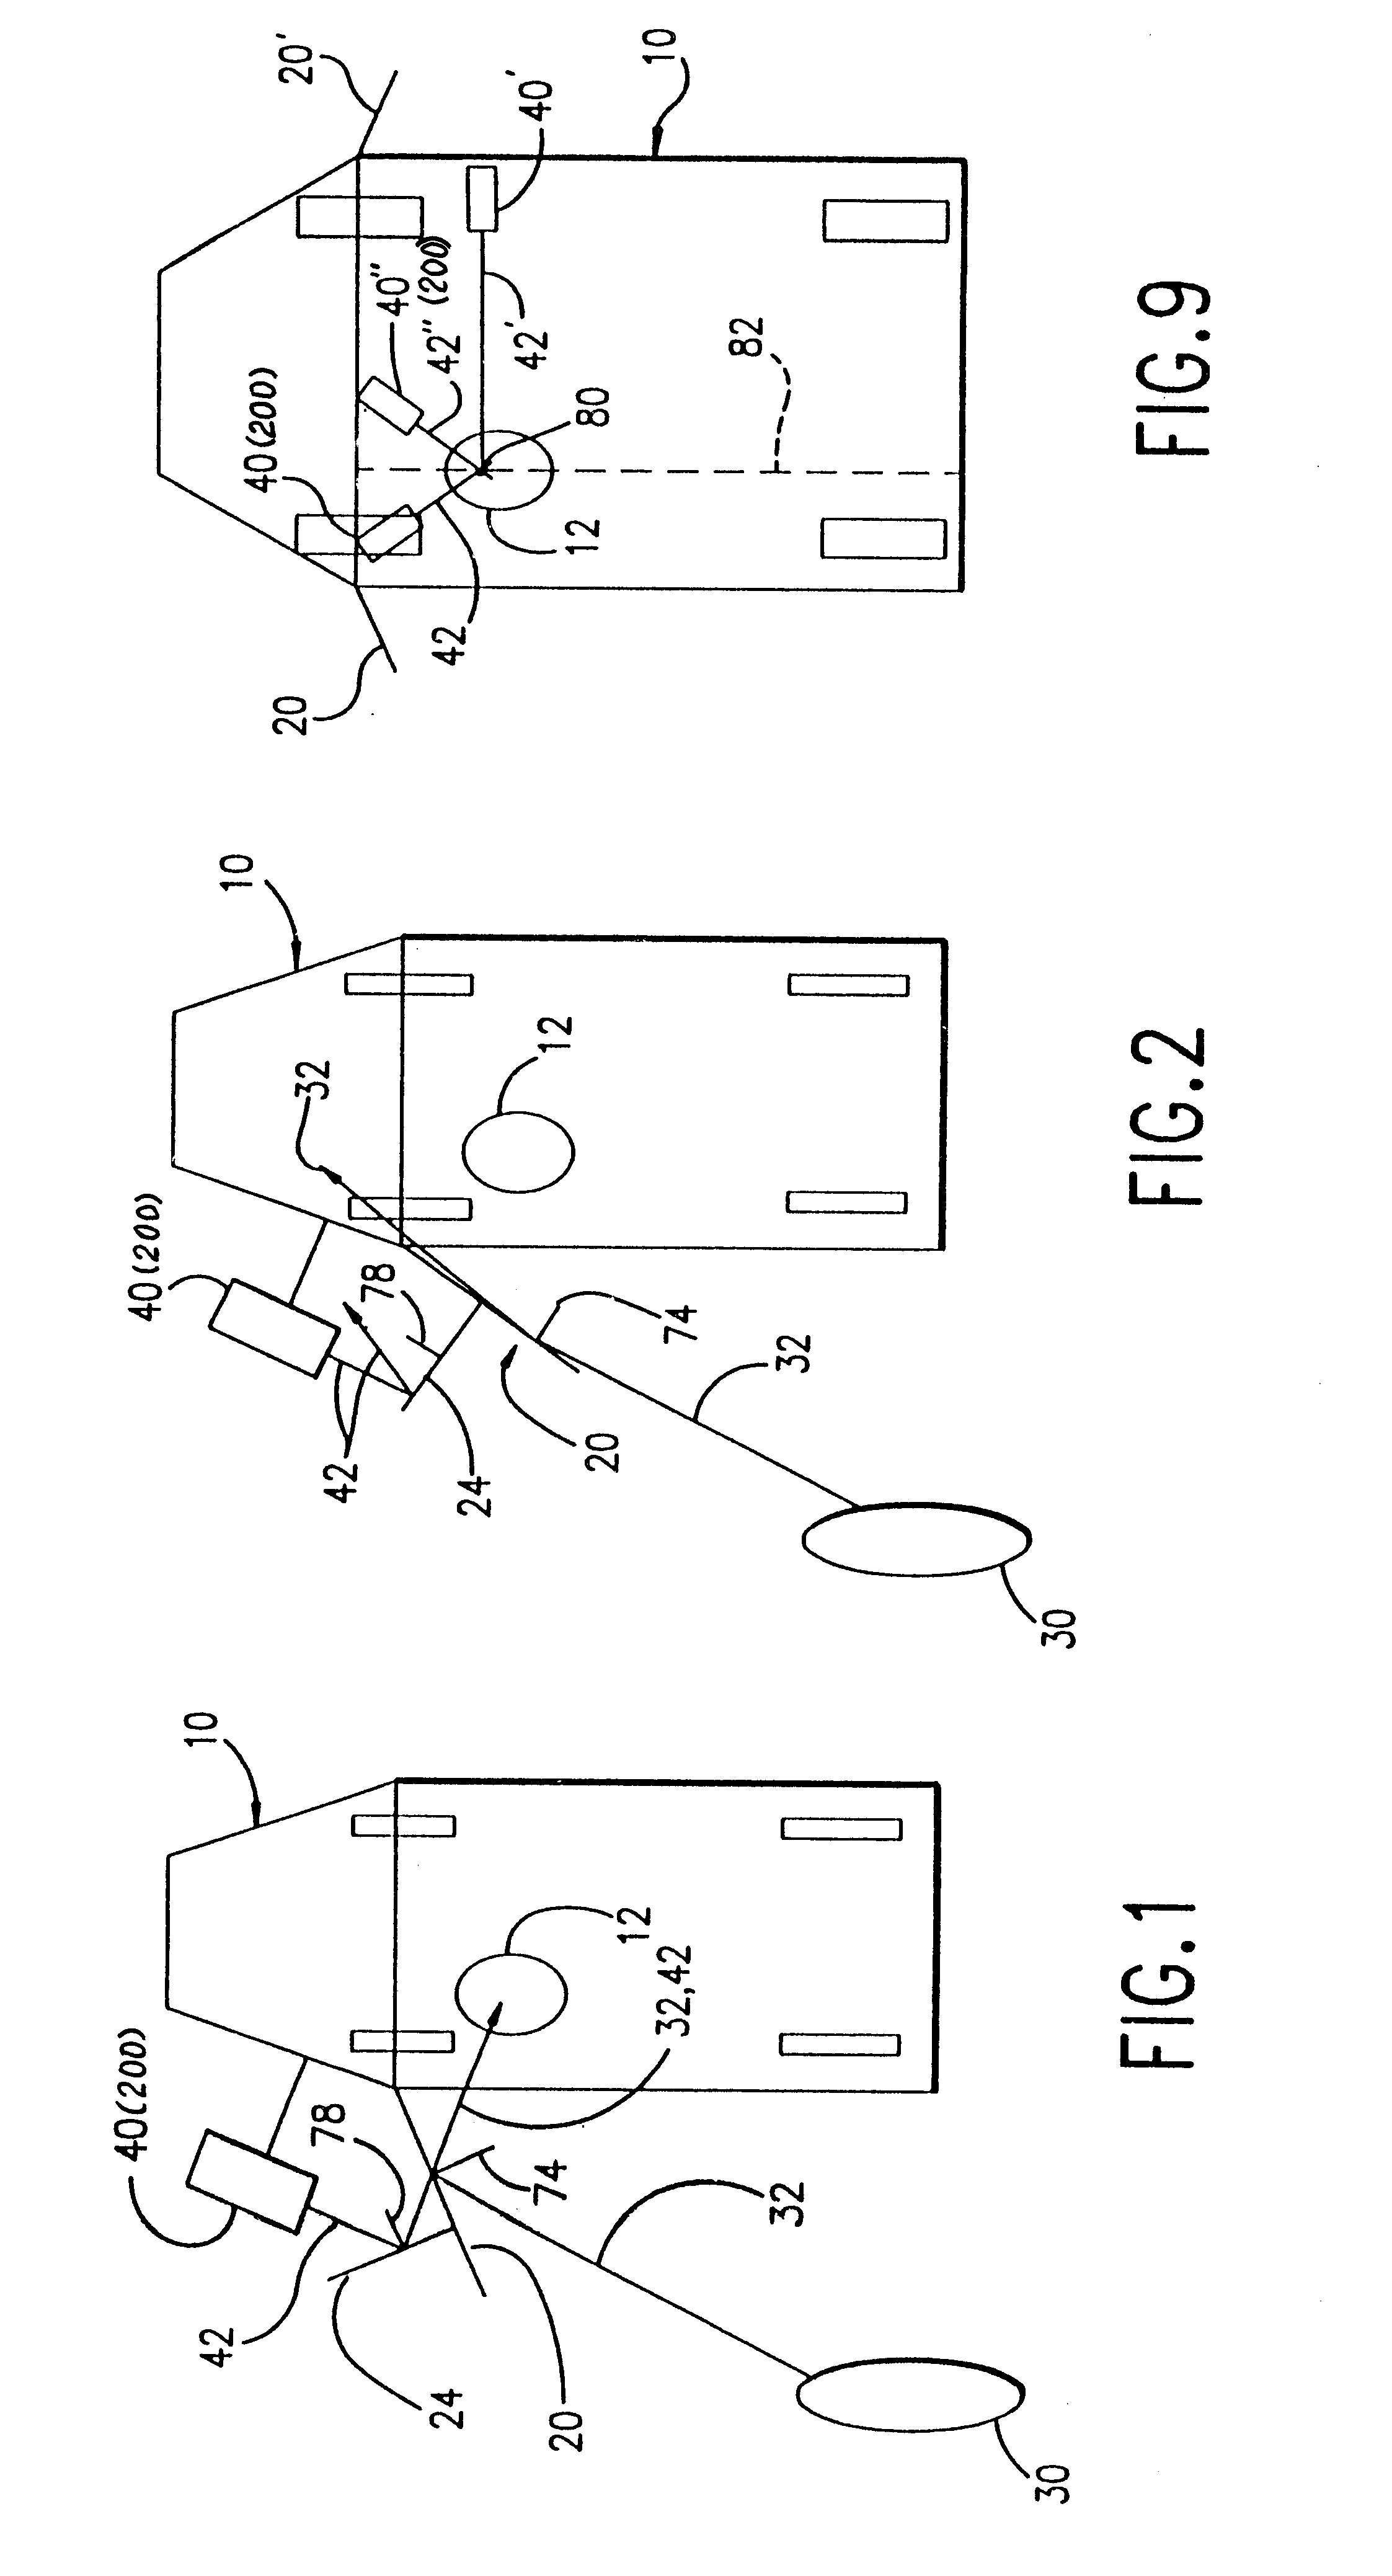 Method and apparatus for determining the location of an occupant of a vehicle